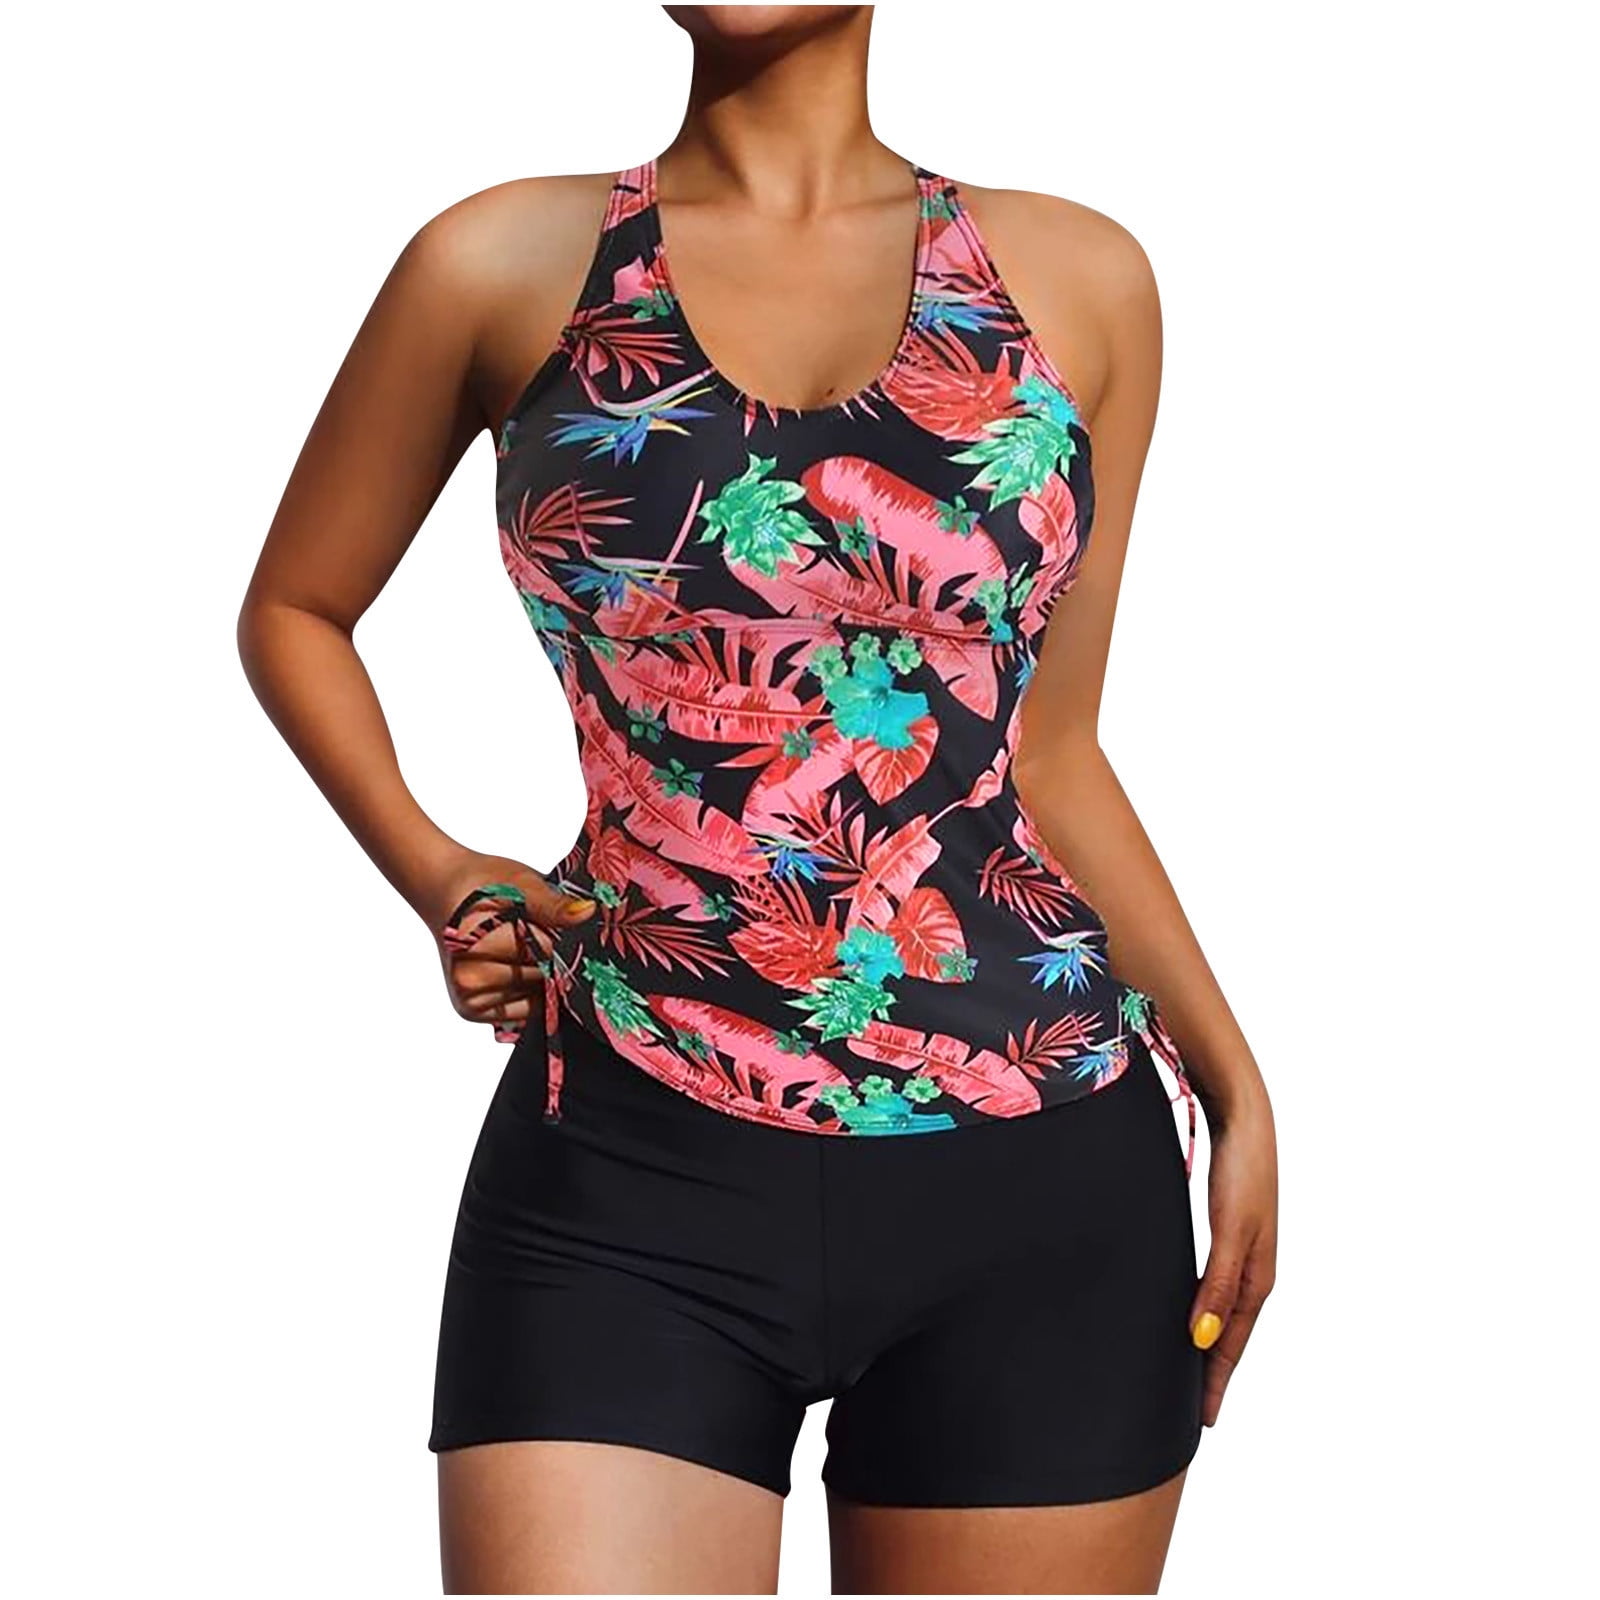 ZQGJB Modest Tankini Set Women's Swimsuit With Bra Without Steel Support  Bikini Multi-color Floral Printed Swimsuit with Shorts Split Two Piece